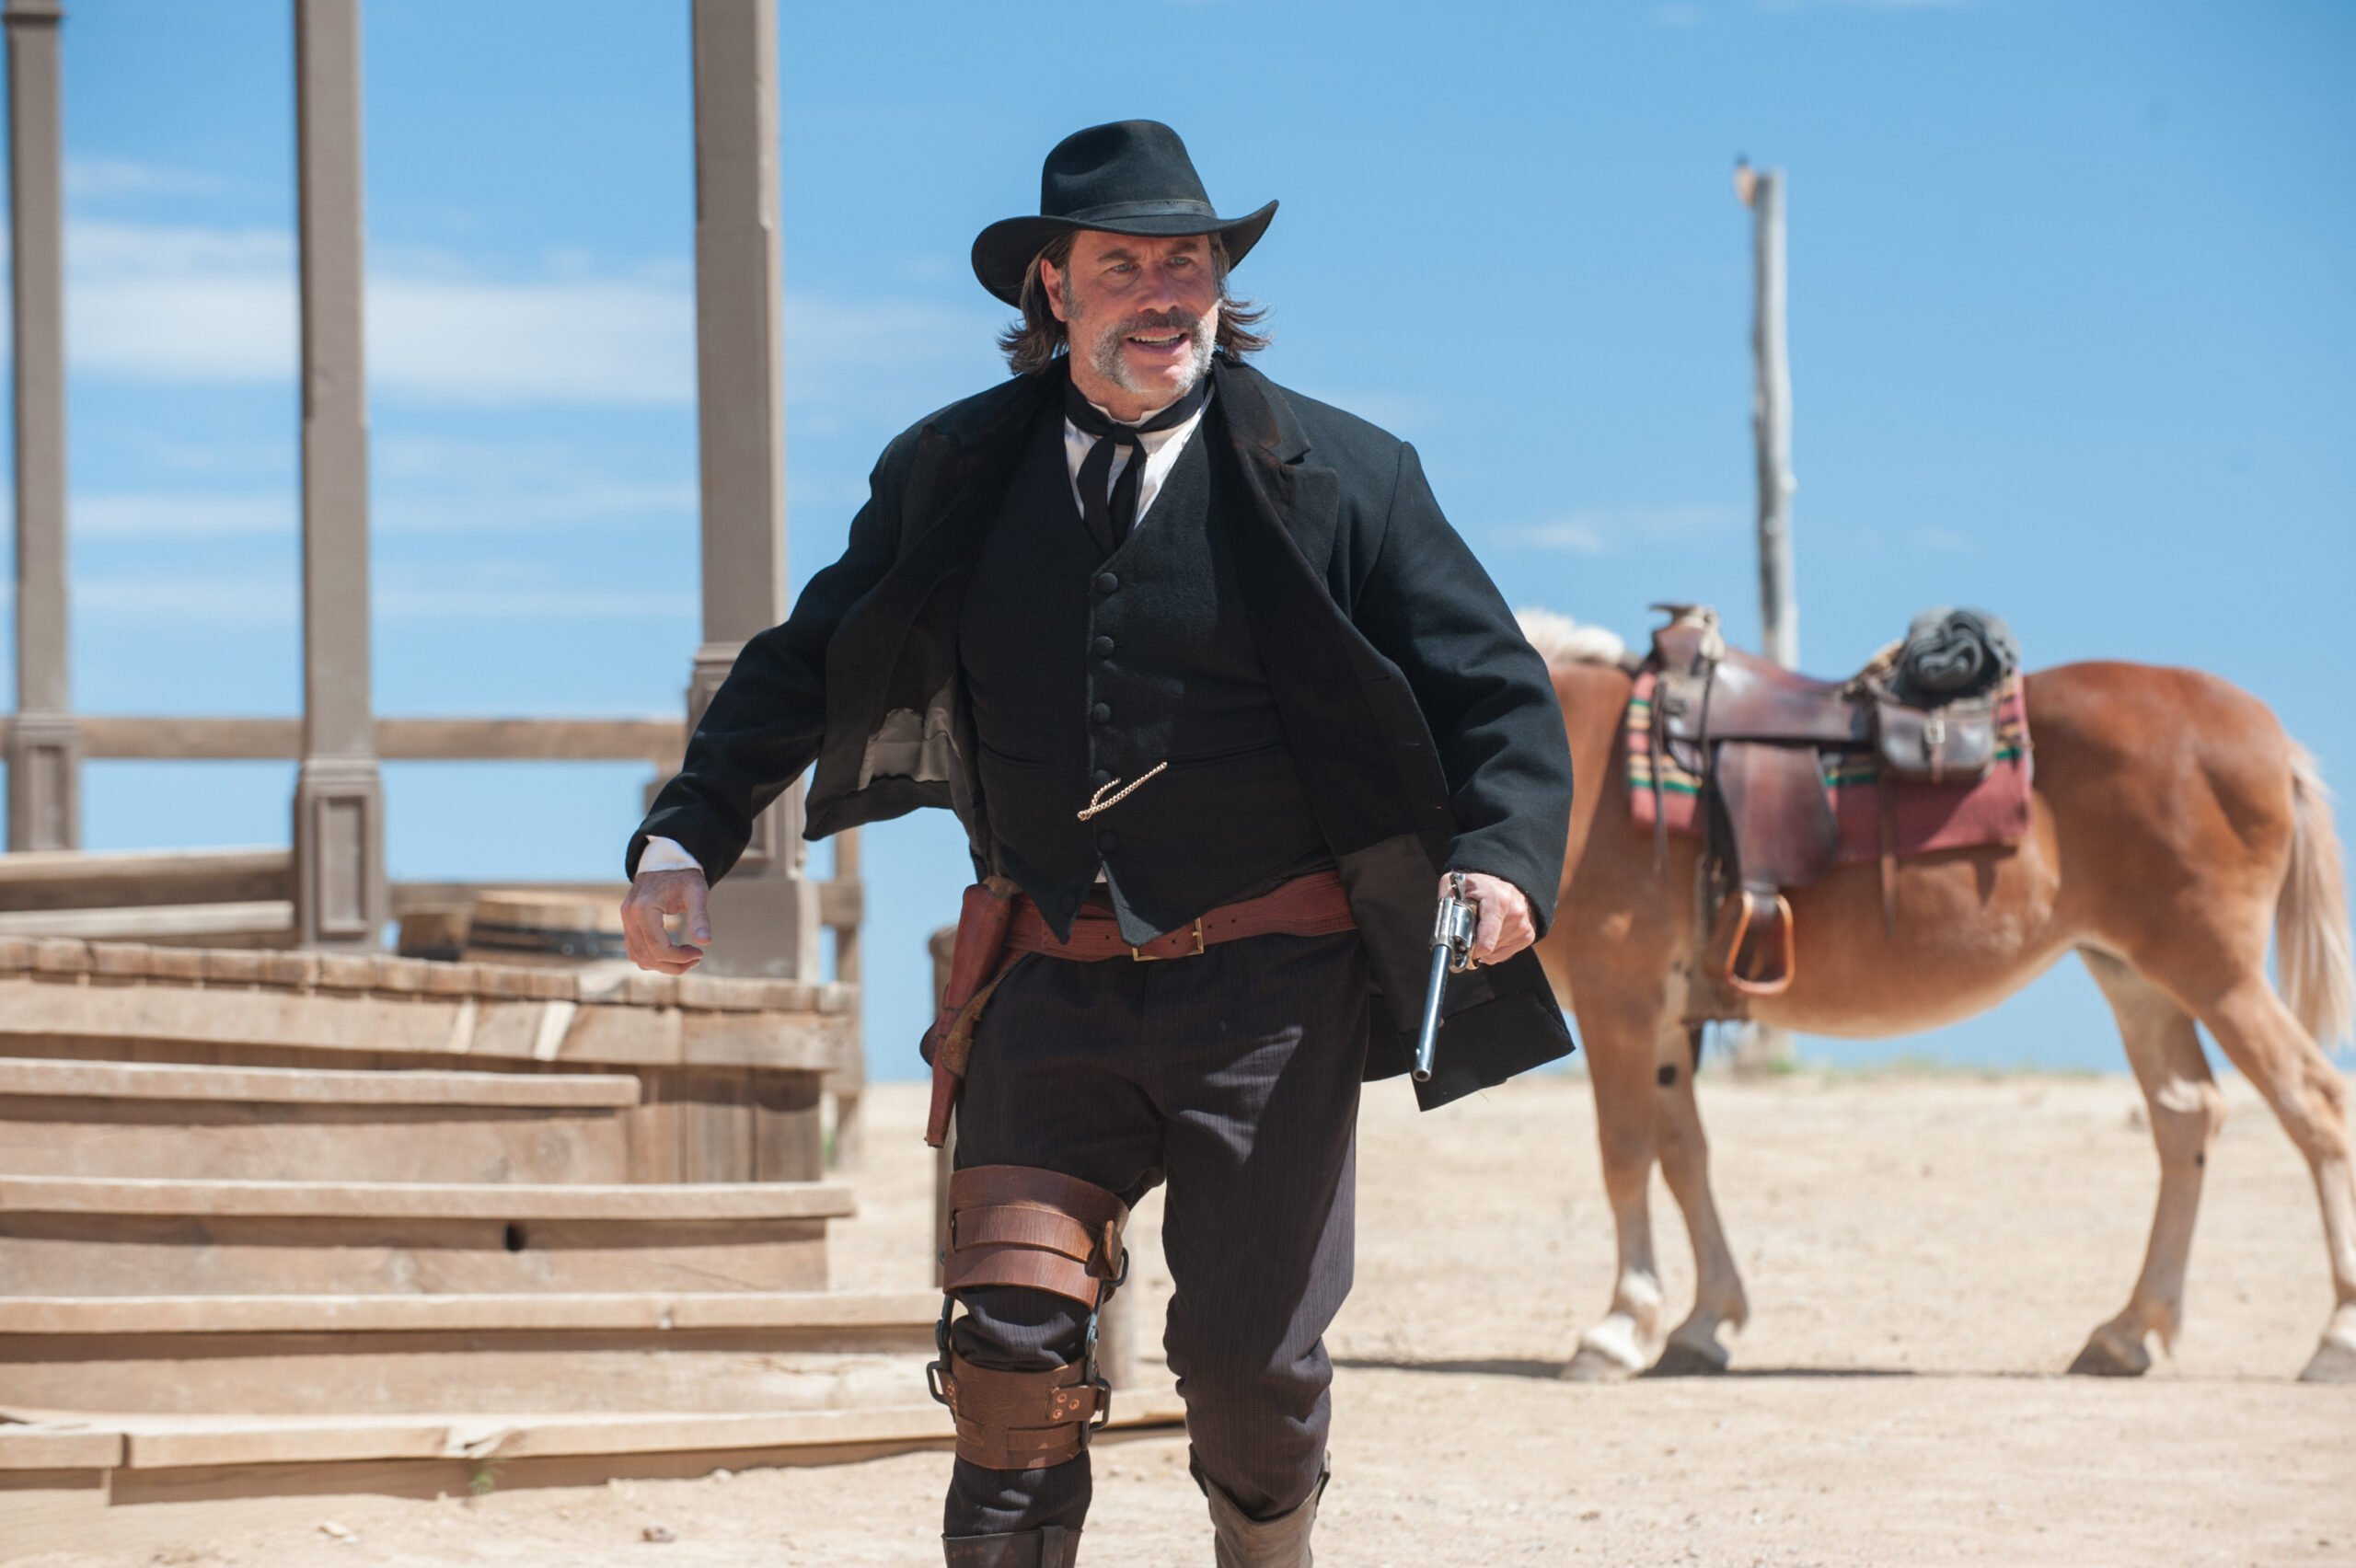 You Need To Watch This John Travolta Western That's Dominating Netflix's Top Ten